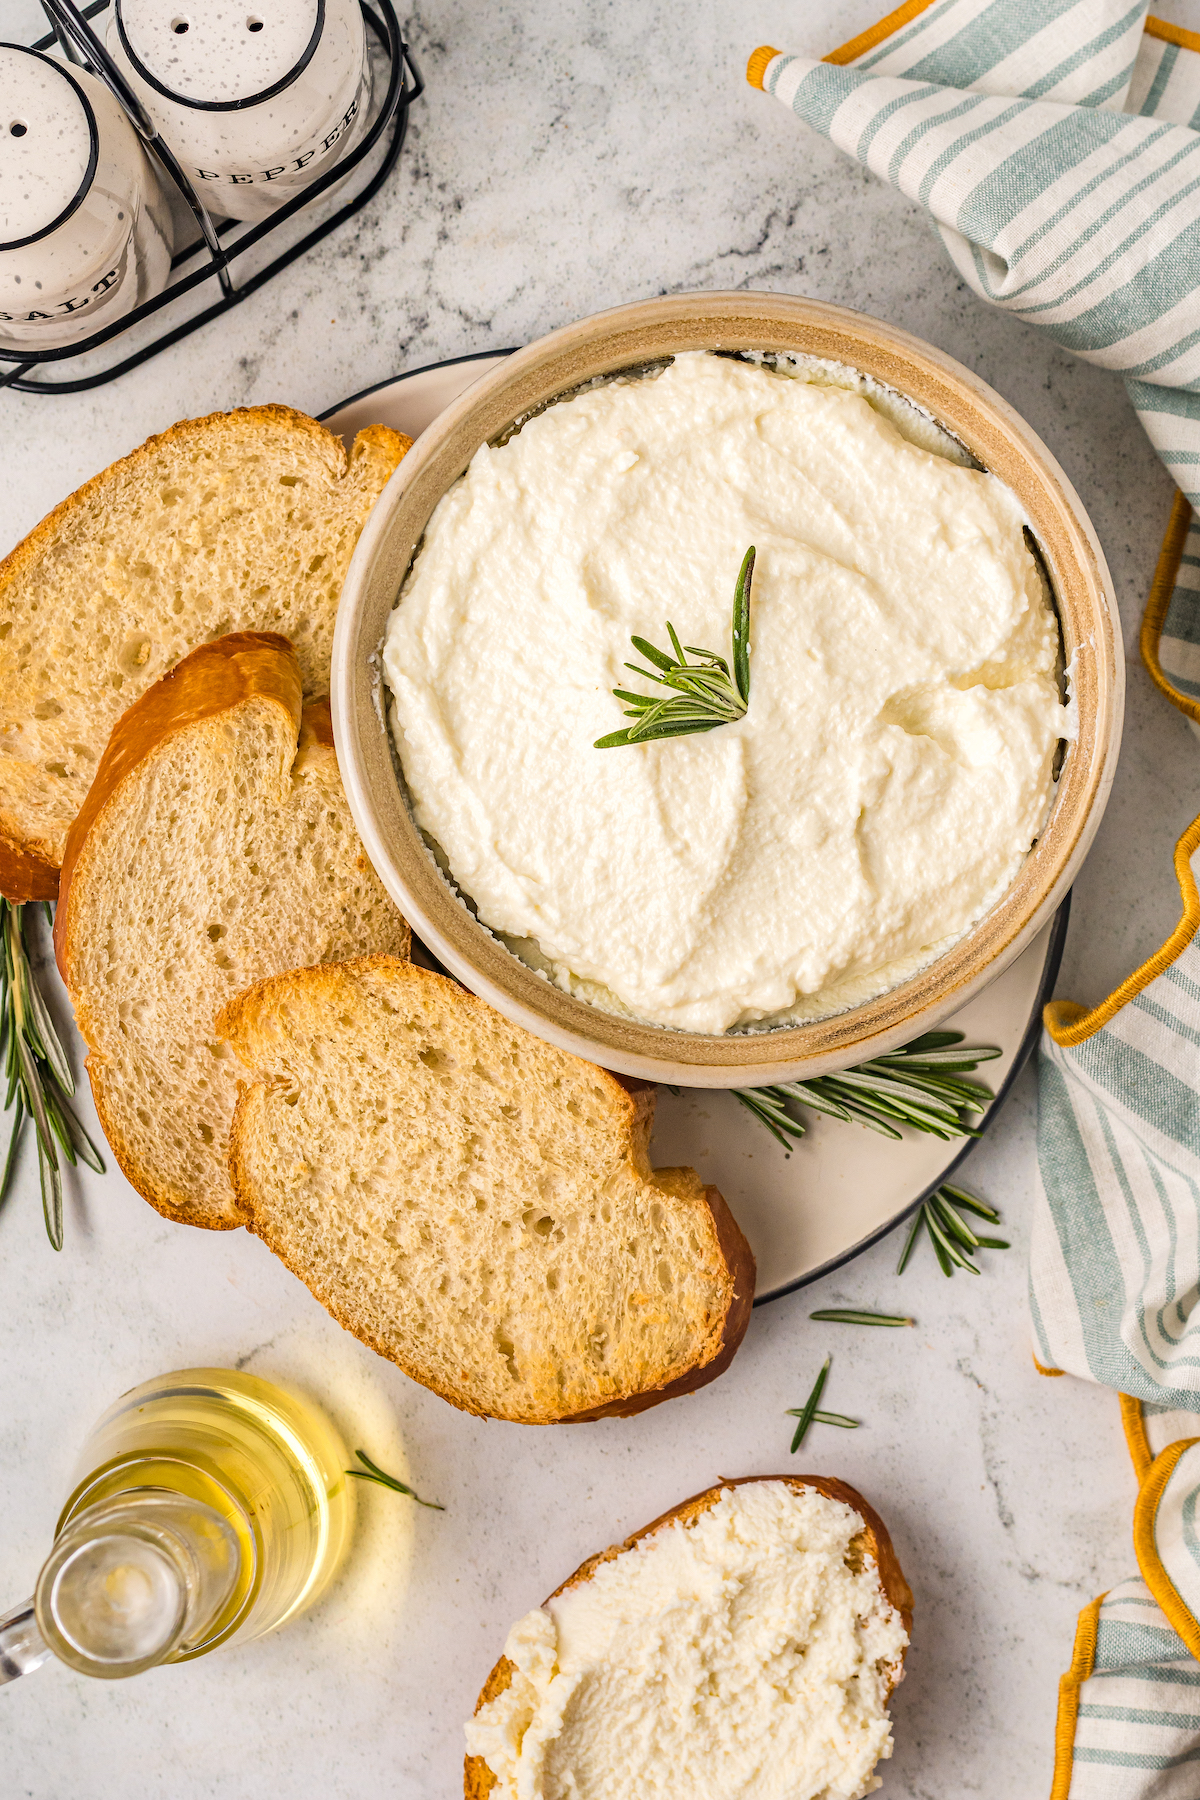 Homemade ricotta in a bowl with toasted baguettes on the side.